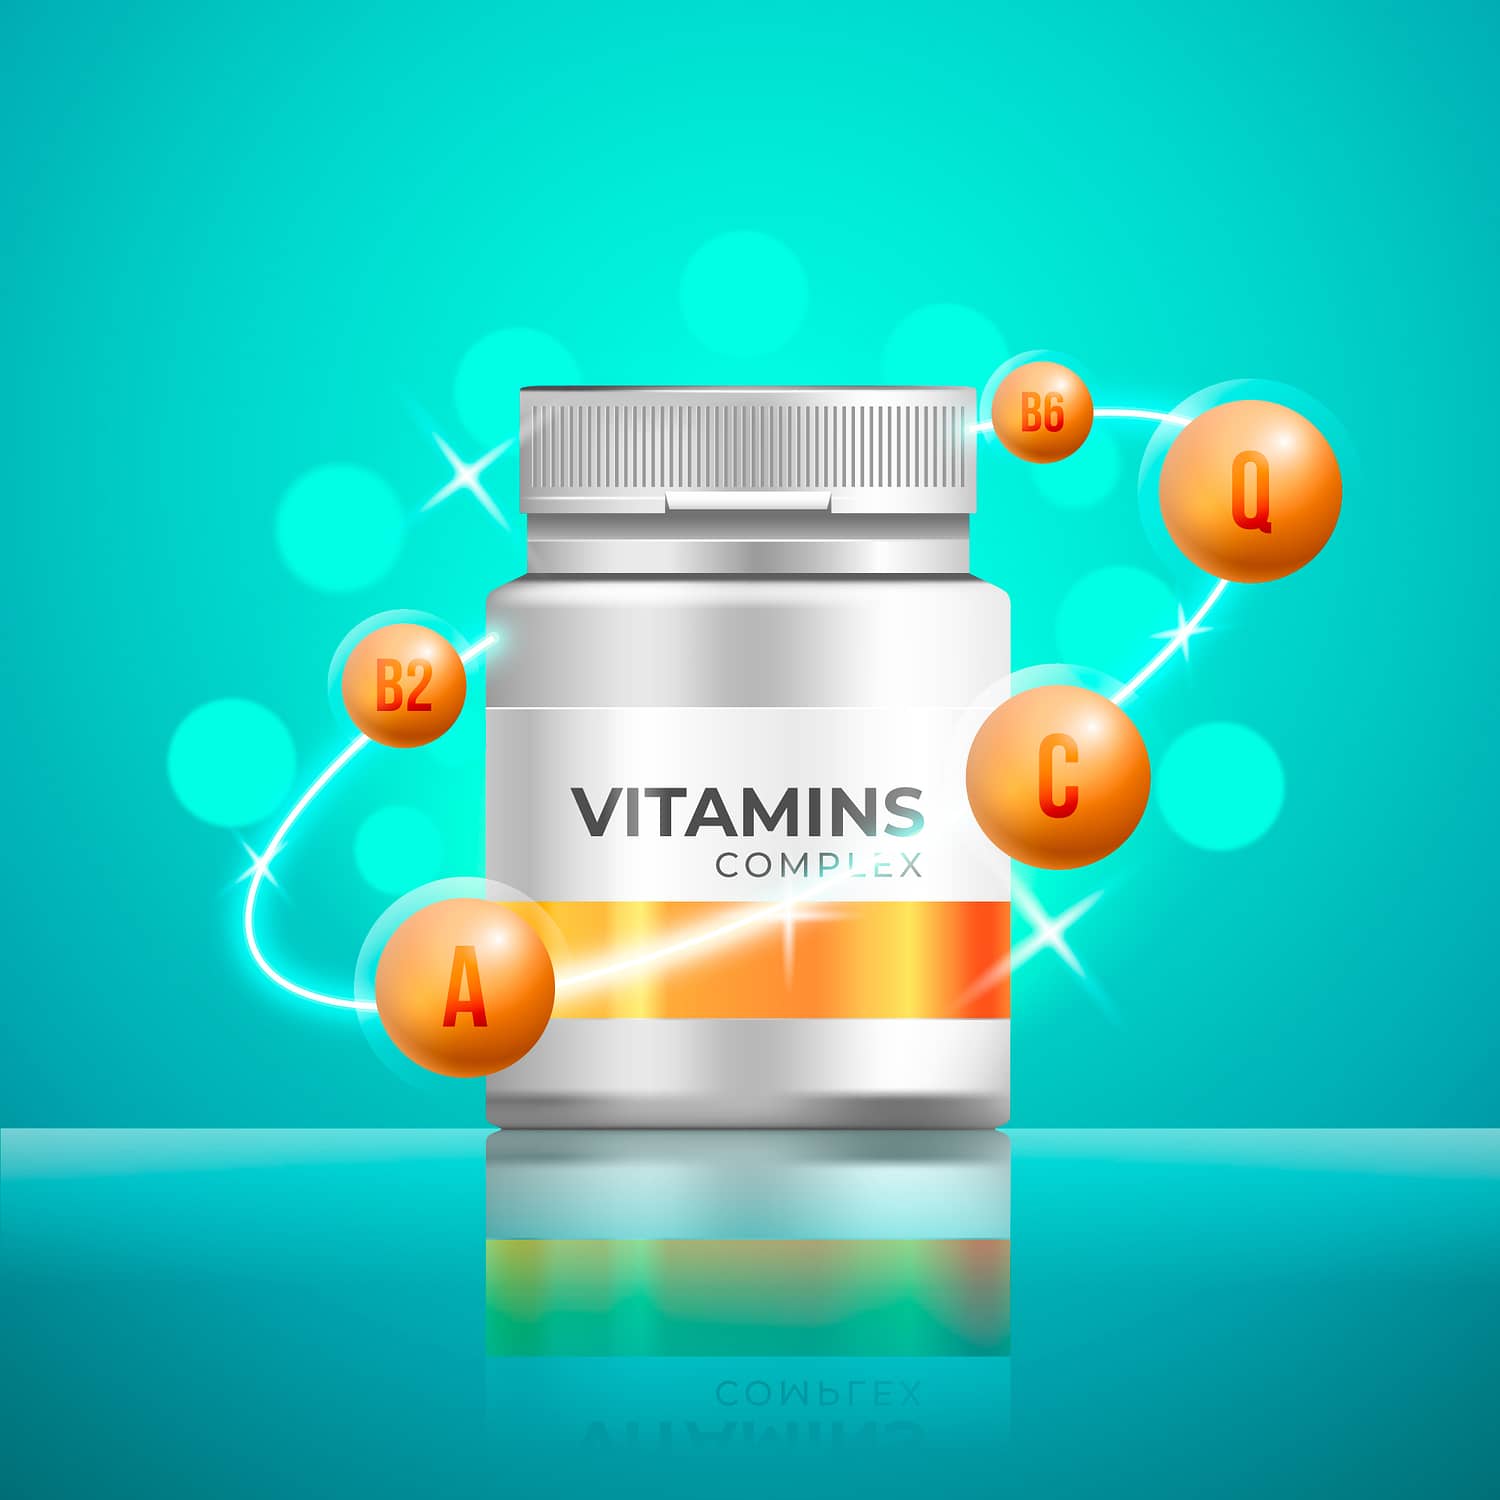 Realistic vitamin complex package